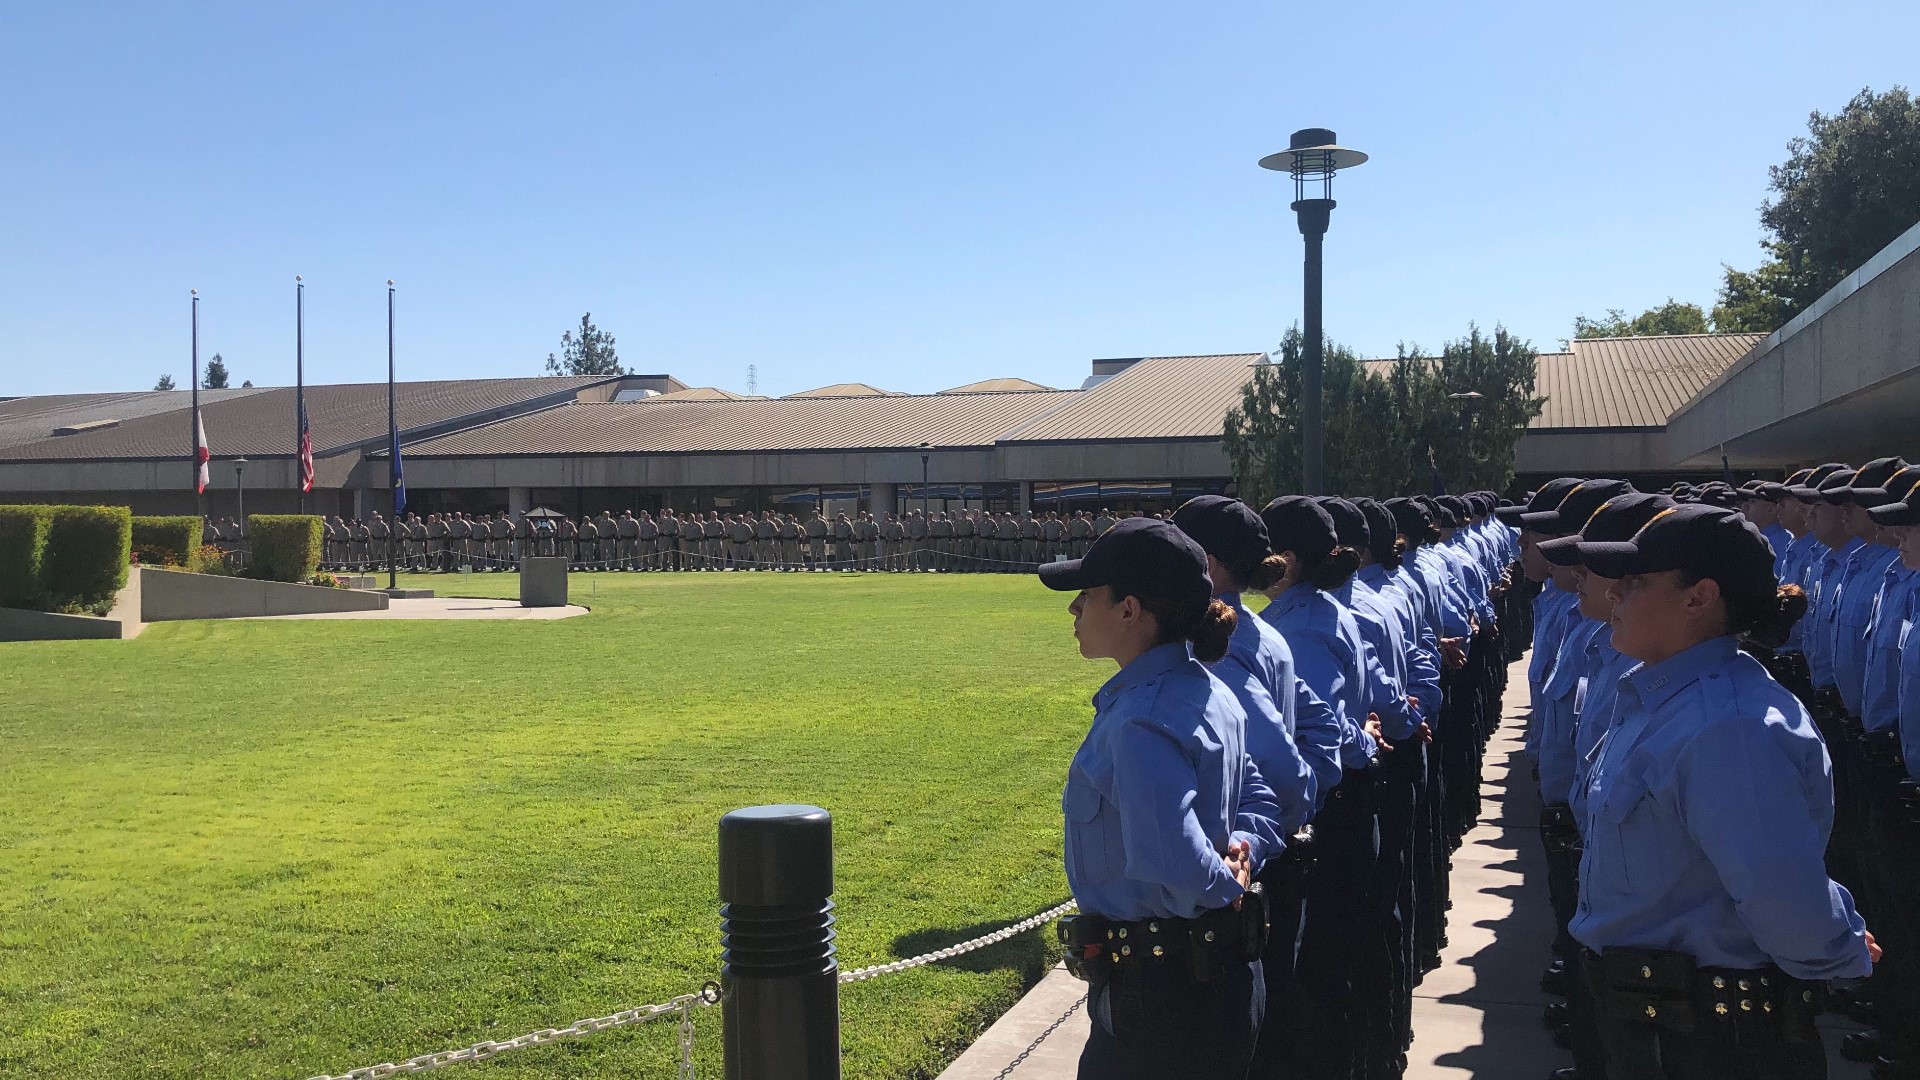 The California Highway Patrol conducted its traditional ceremony at the CHP Academy in West Sacramento on Monday for Officer Andrew Moye, Jr., the motorcycle officer killed during a traffic stop in Riverside, Calif.